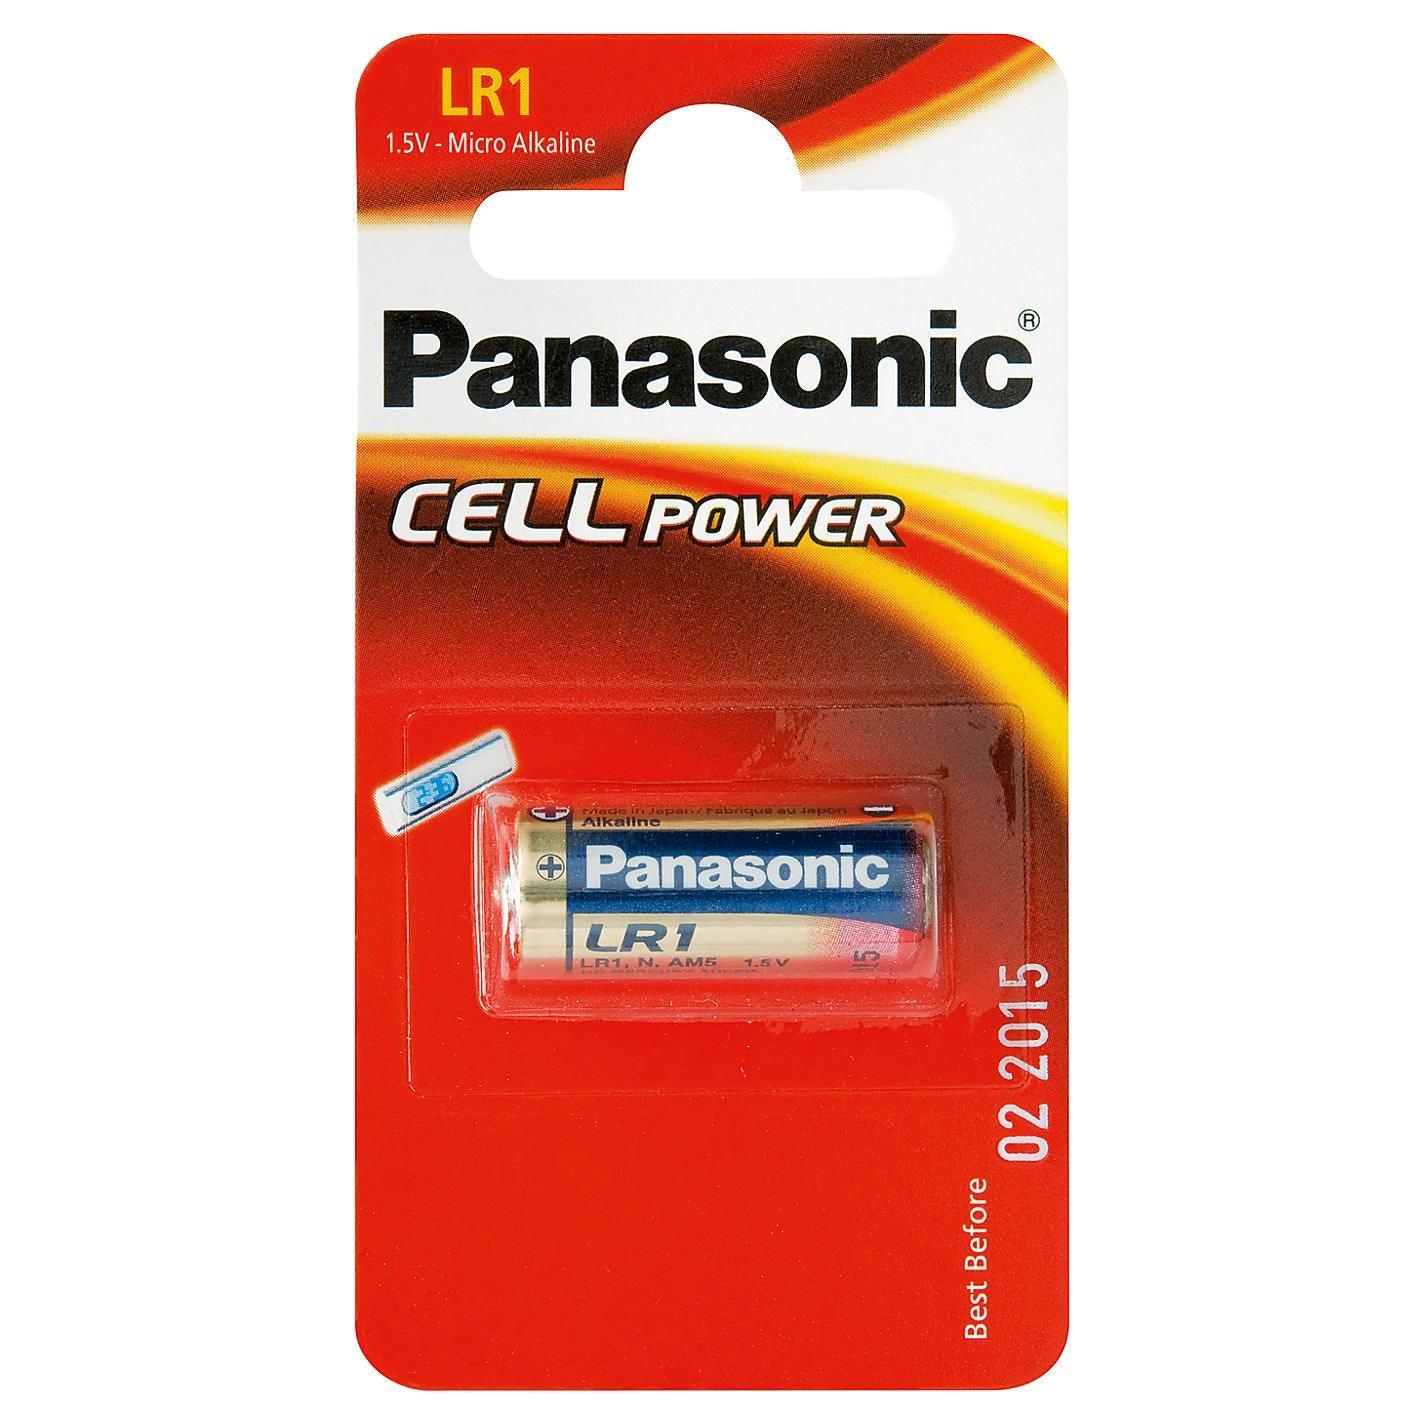 Panasonic Cylindrical Micro Alkaline LR1 Battery | Single Pack - Choice Stores